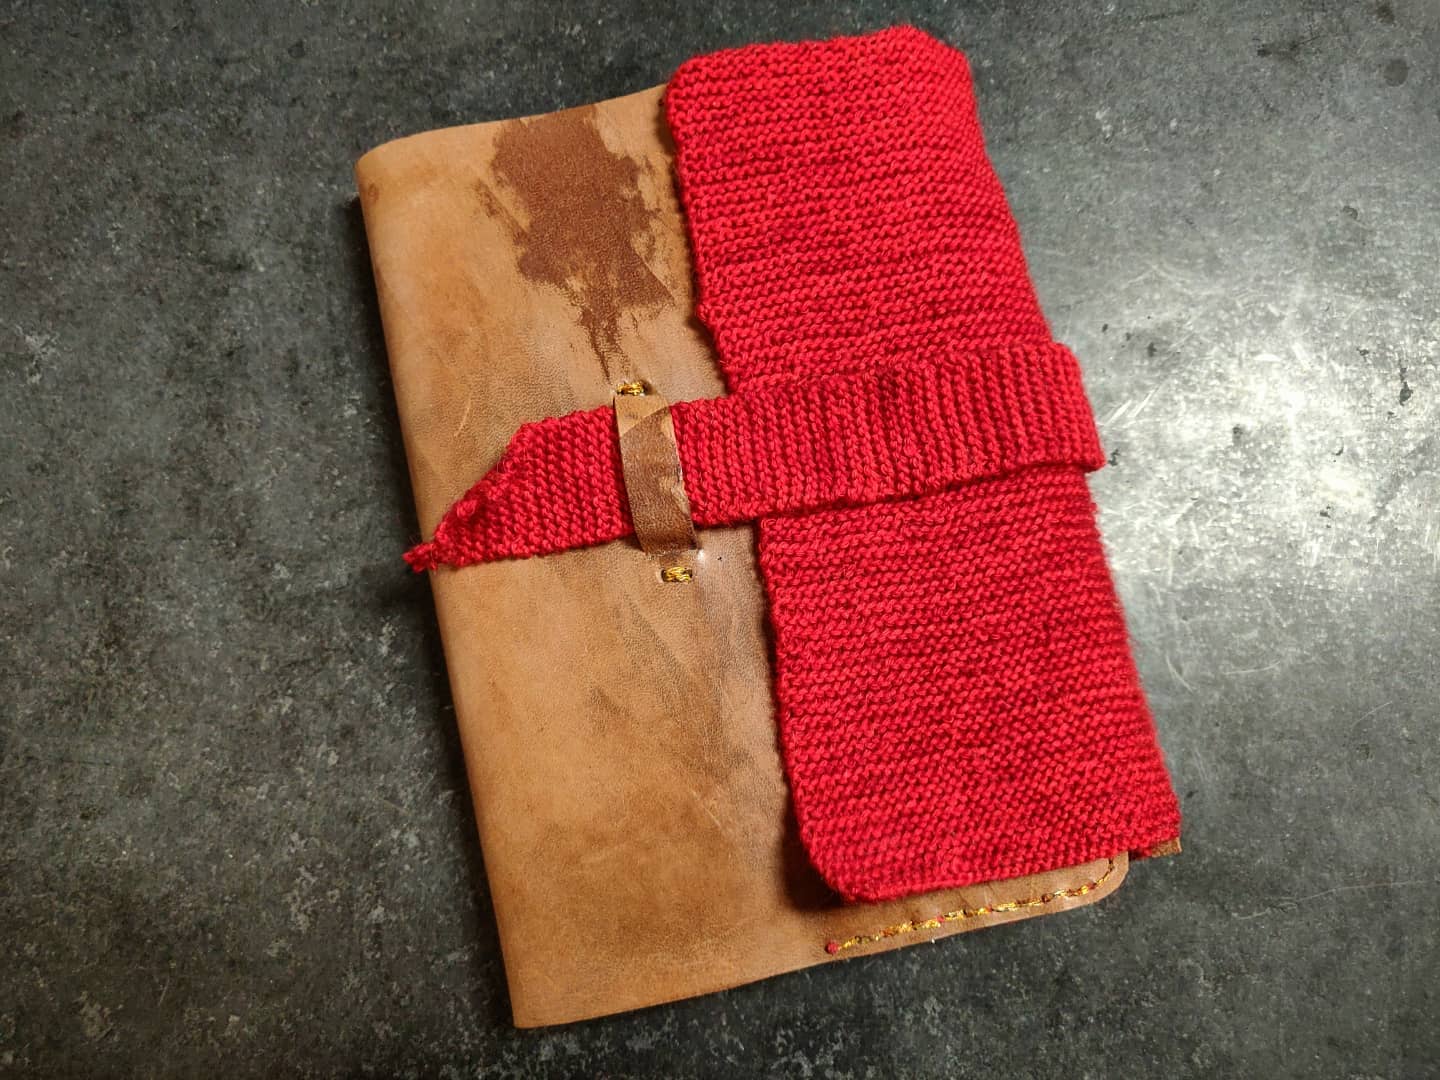 Natural tan leather and red knit journal with a flap and strap